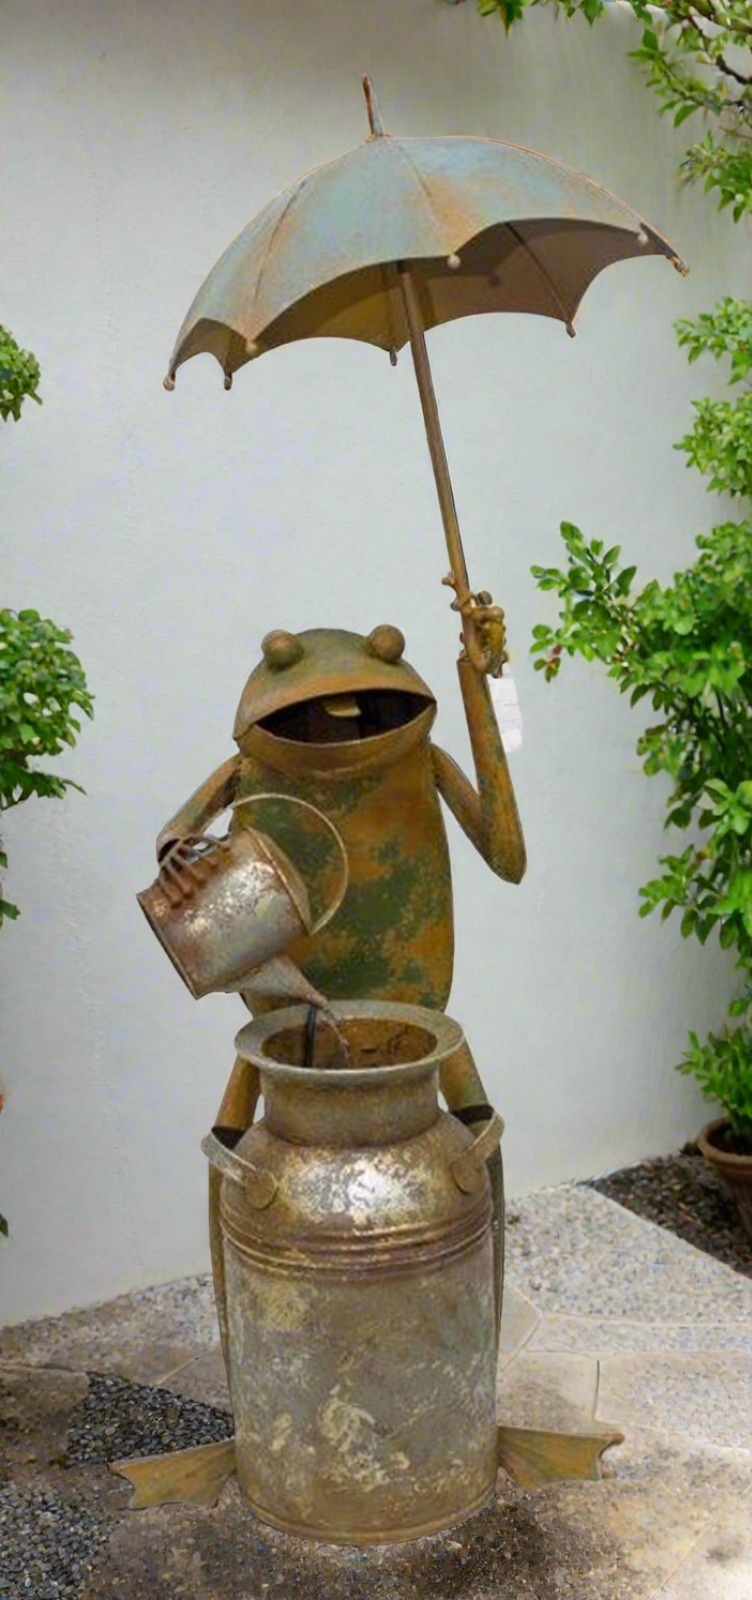 Farmhouse Country Garden Whimsical Frog w/ Watering Can Fountain Iron - The Primitive Pineapple Collection